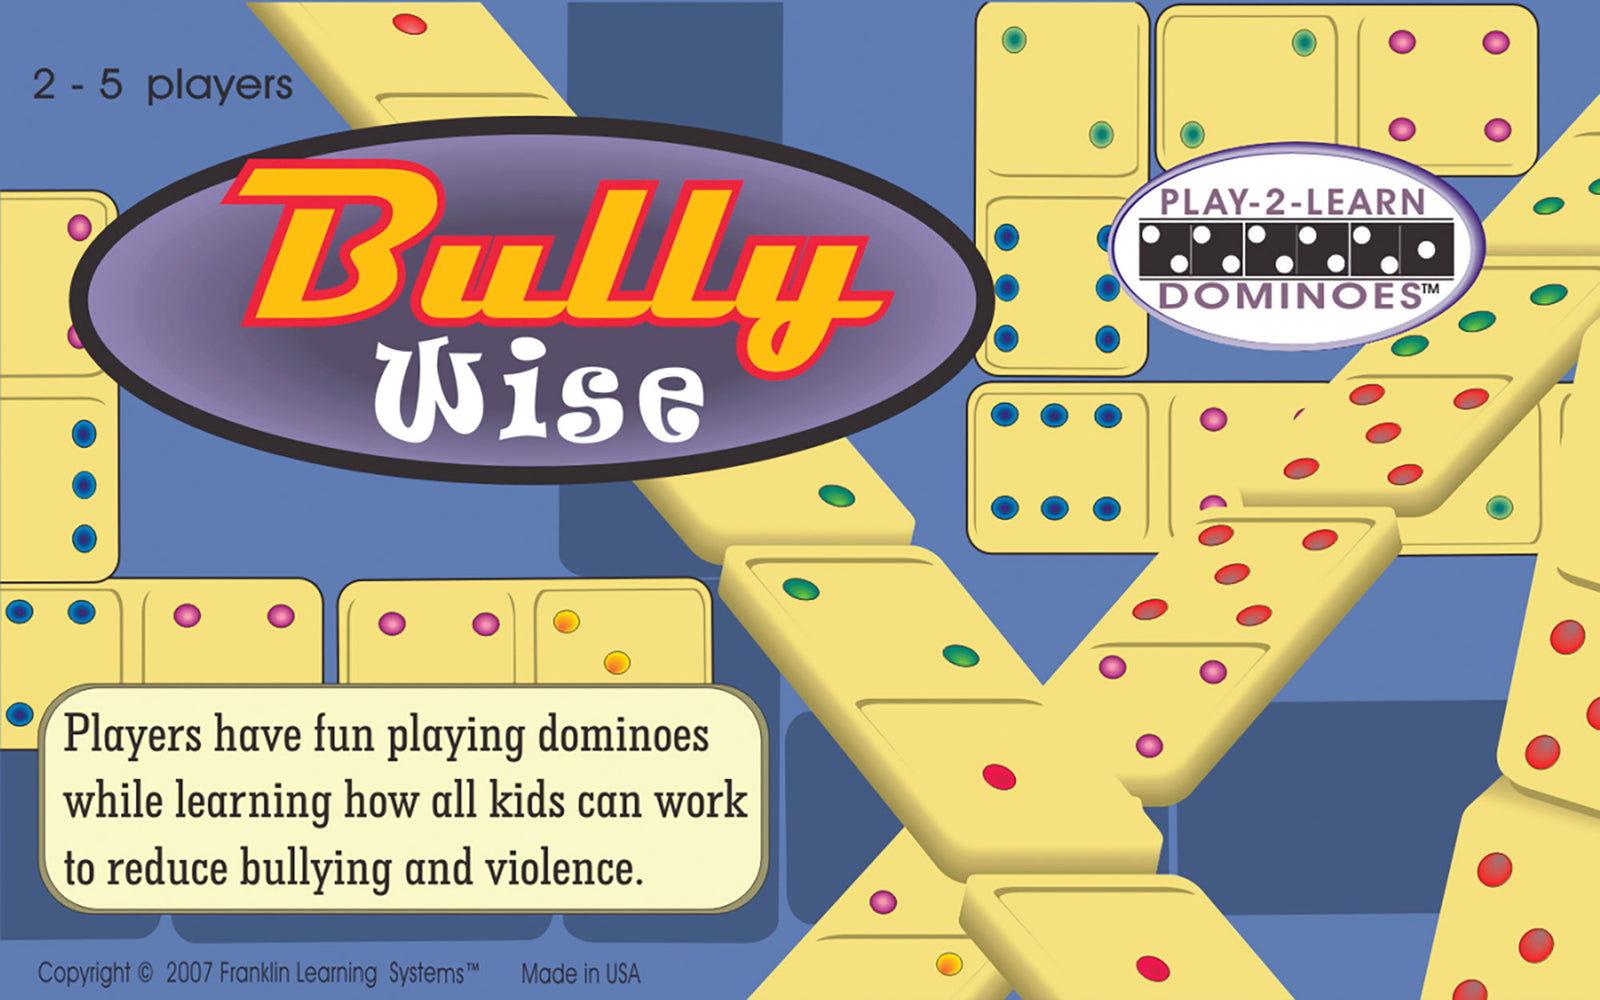 Bully Wise: Play-2-Learn Dominoes